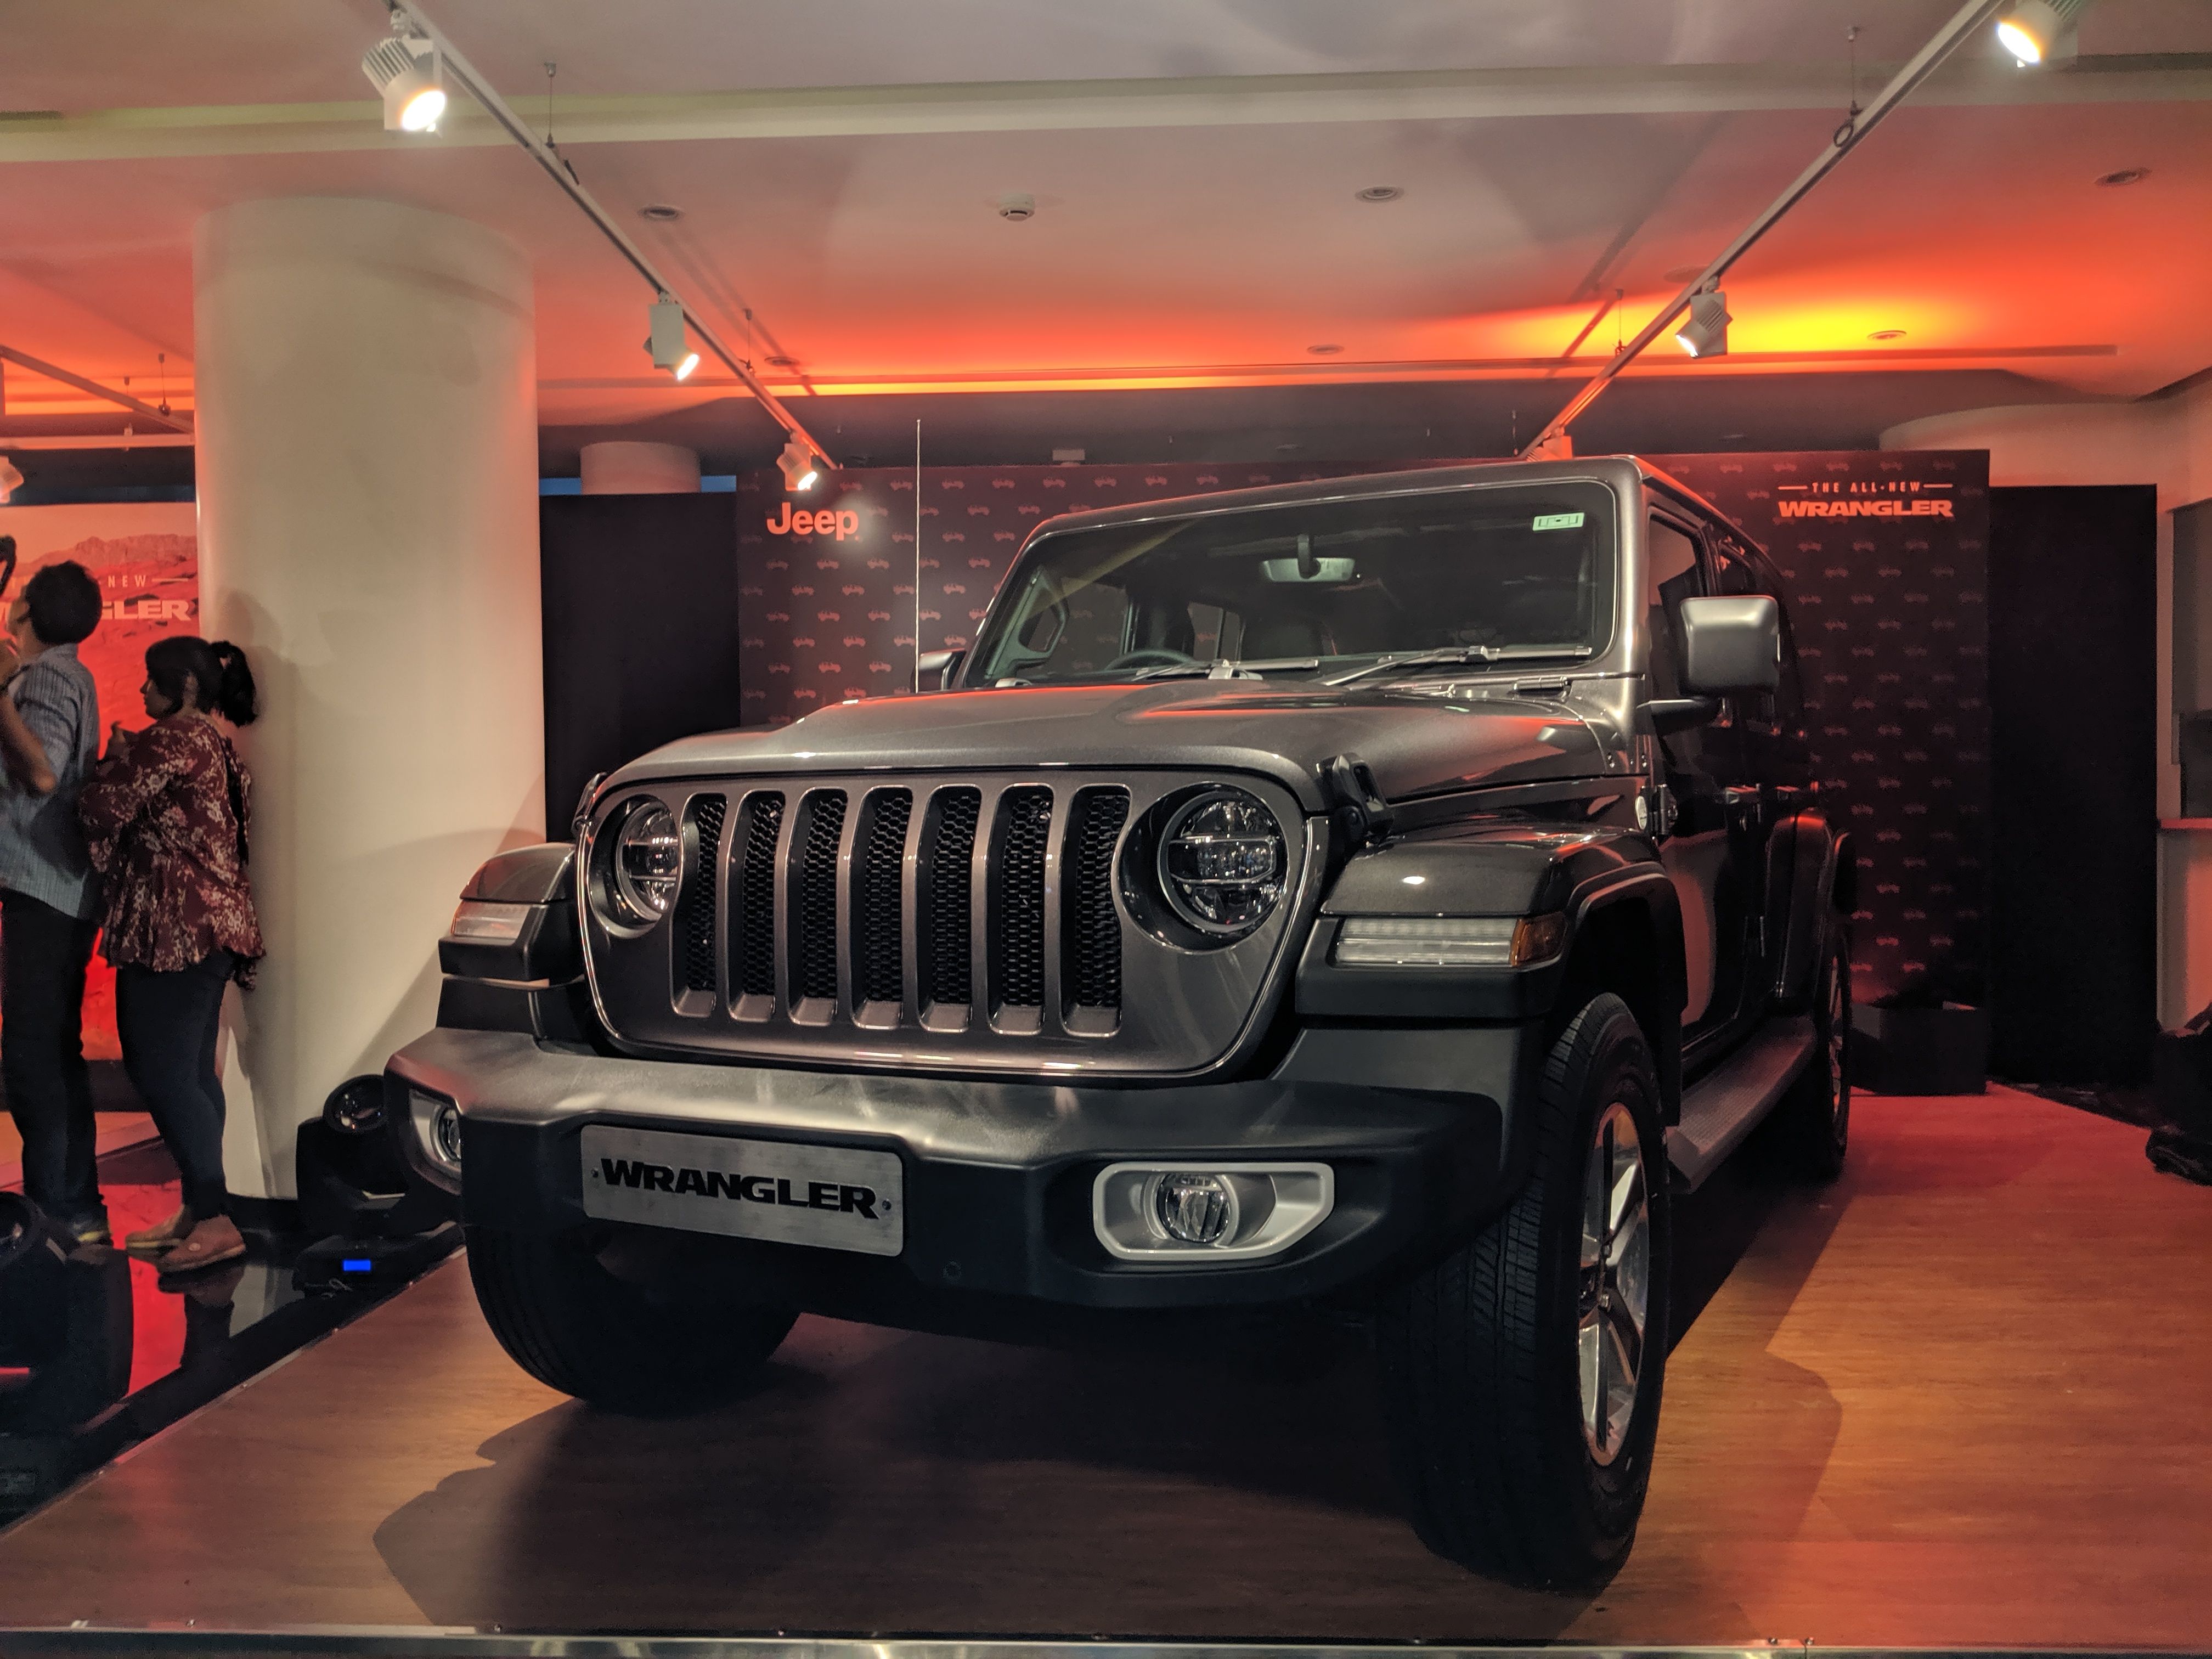 2019 Jeep Wrangler Launched In India At Rs  Lakh - ZigWheels